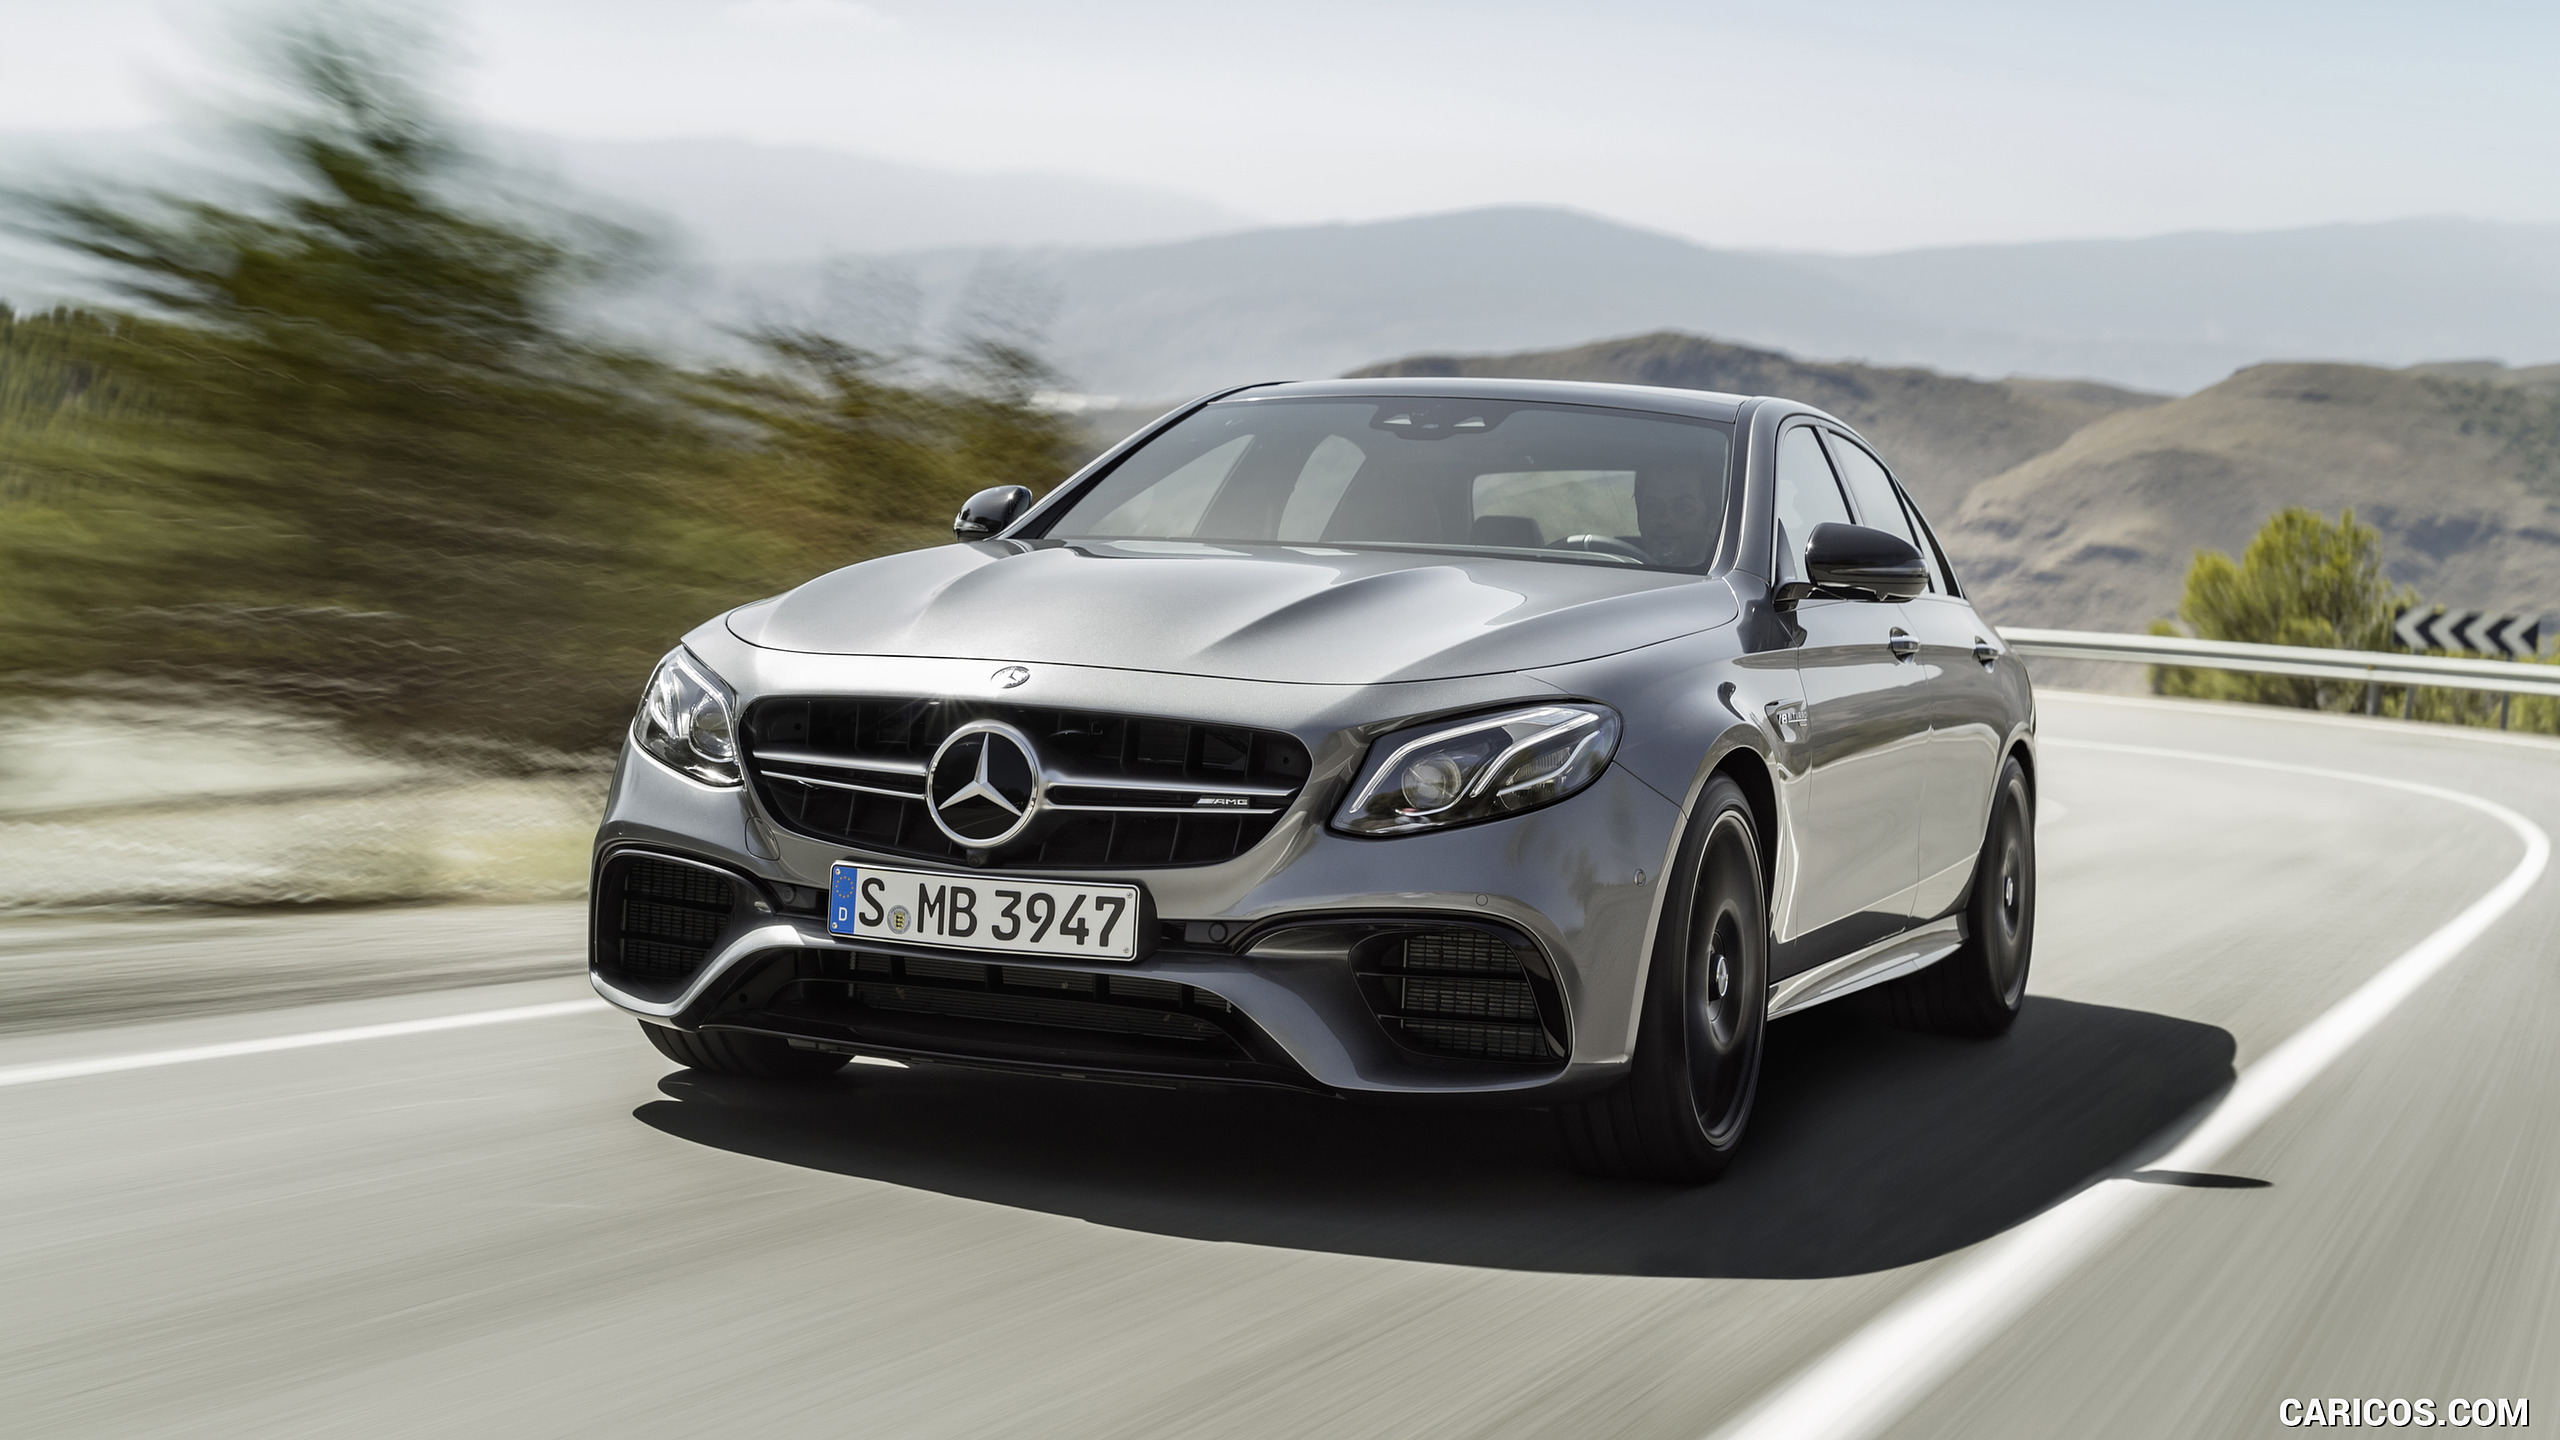 2018 Mercedes-AMG E63 S 4MATIC+ - Front, #8 of 323